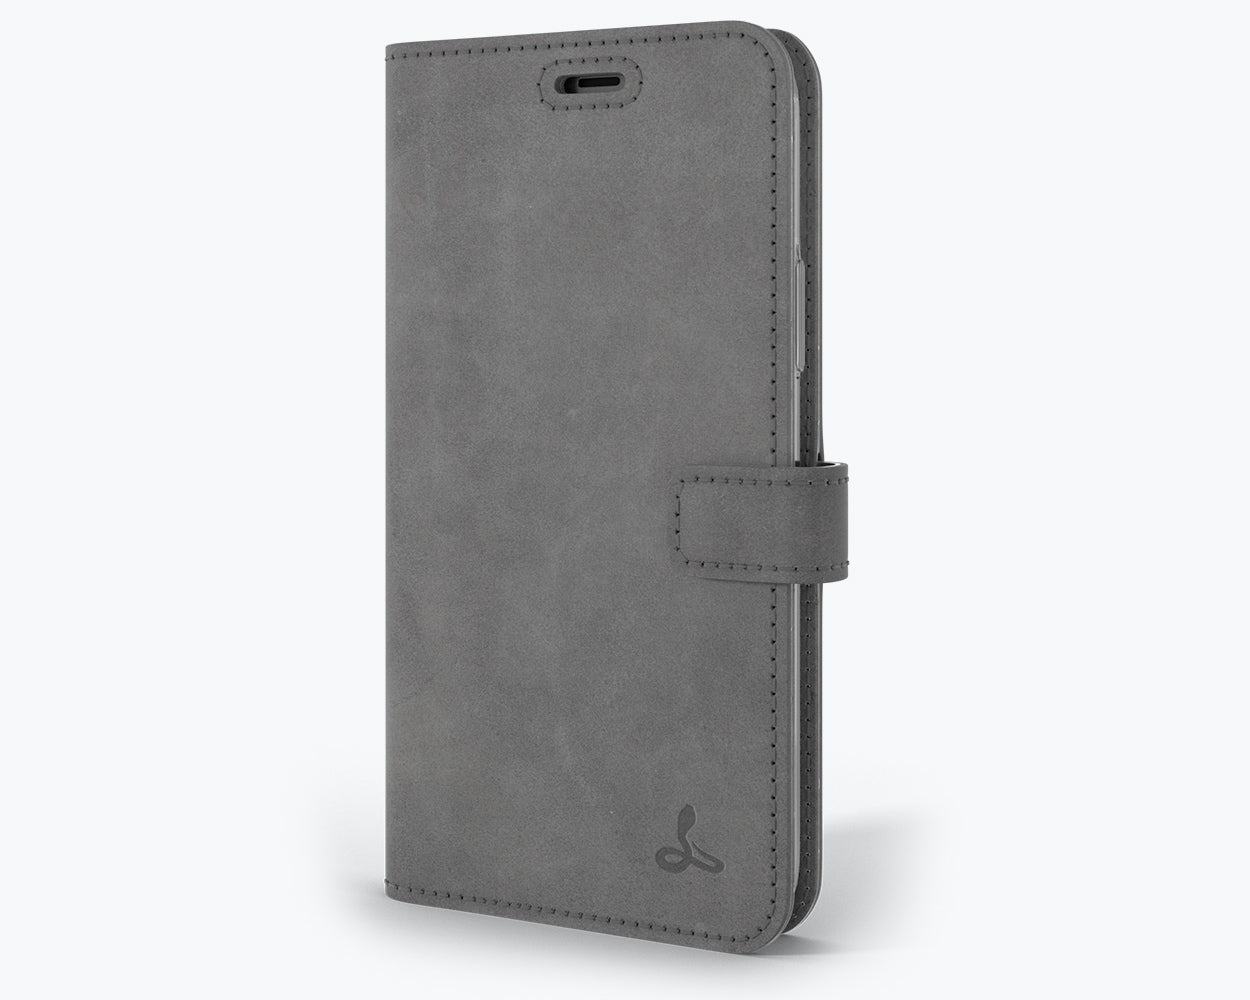 Apple iPhone 11 Pro Max - Vintage Leather Wallet (Almost Perfect) Grey Apple iPhone 11 Pro Max - Snakehive UK